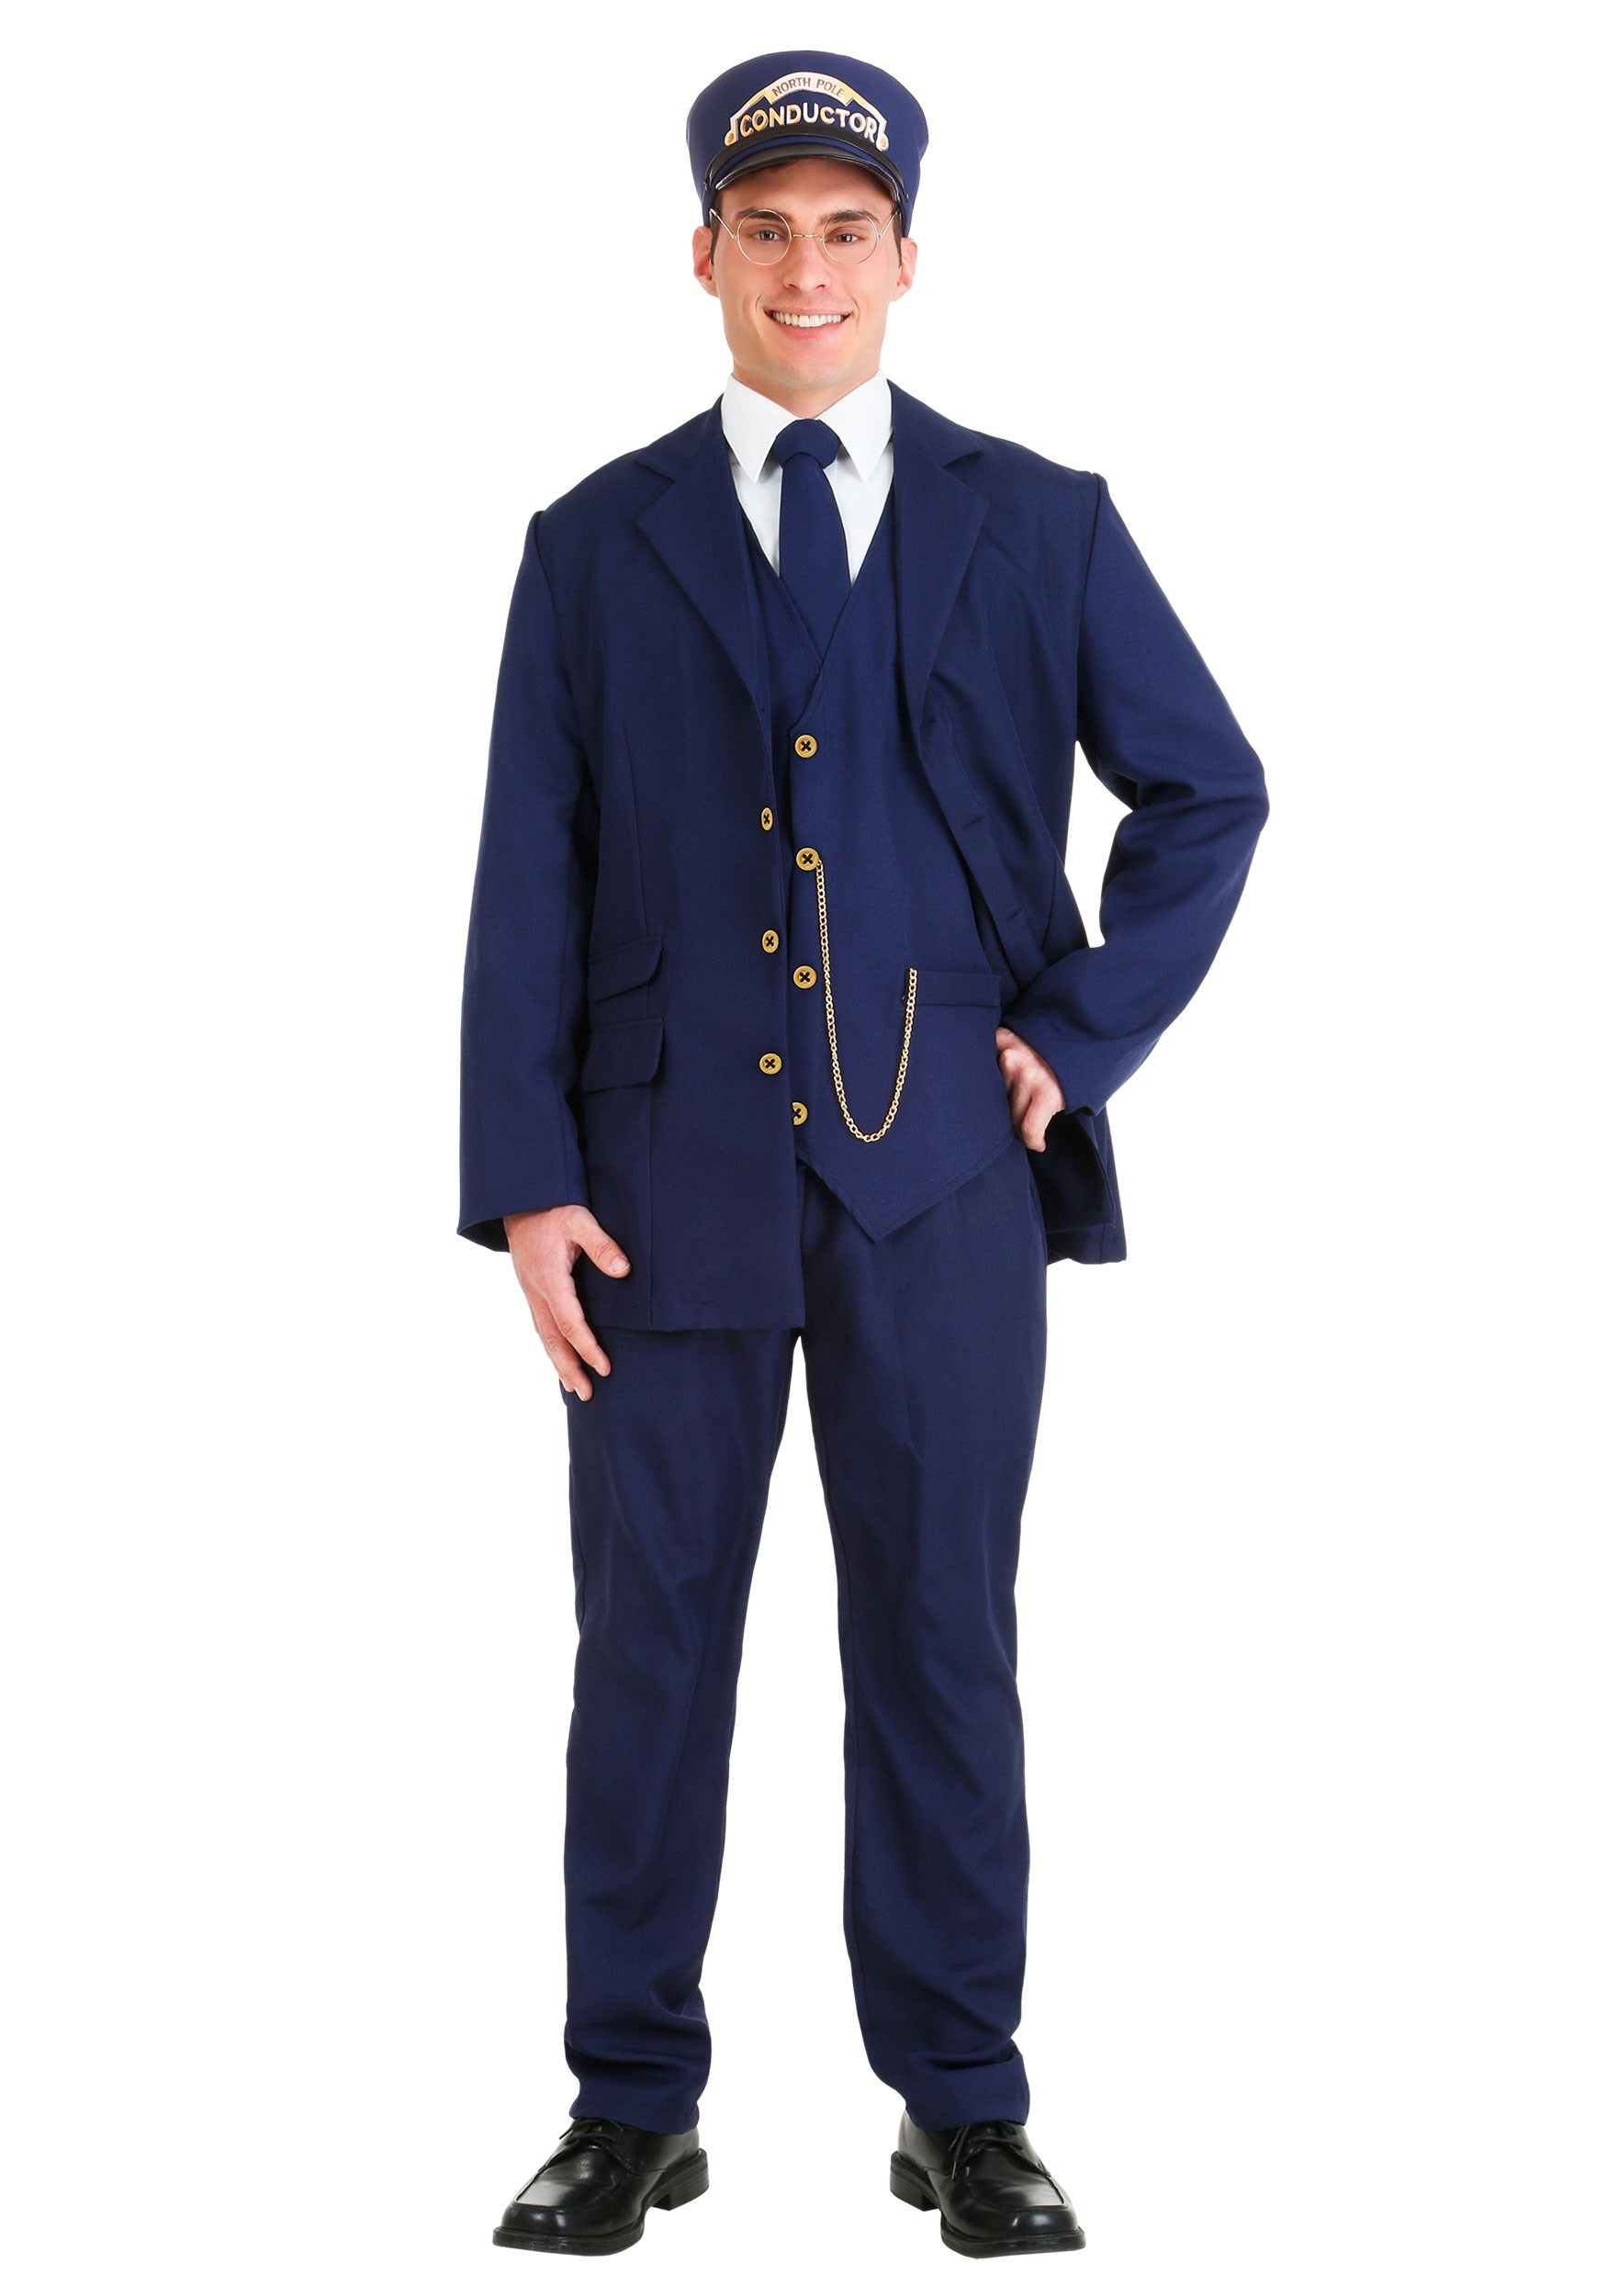 North Pole Train Conductor Plus Size Costume for Adults